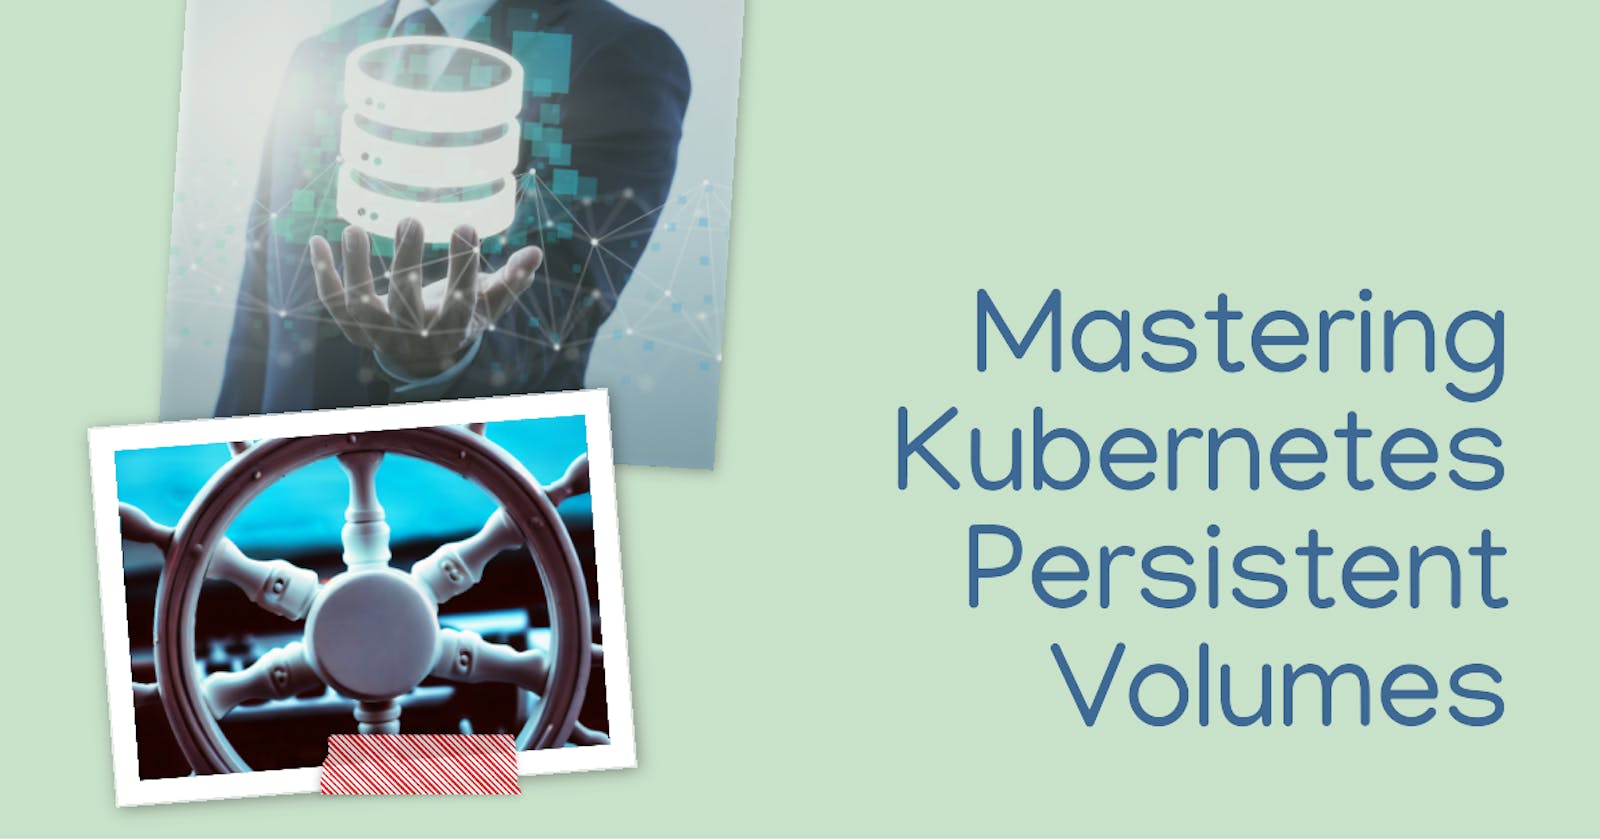 Mastering Kubernetes Persistent Volumes: A Guide for Beginners 🚀 | Day 36 of 90DaysOfDevOps